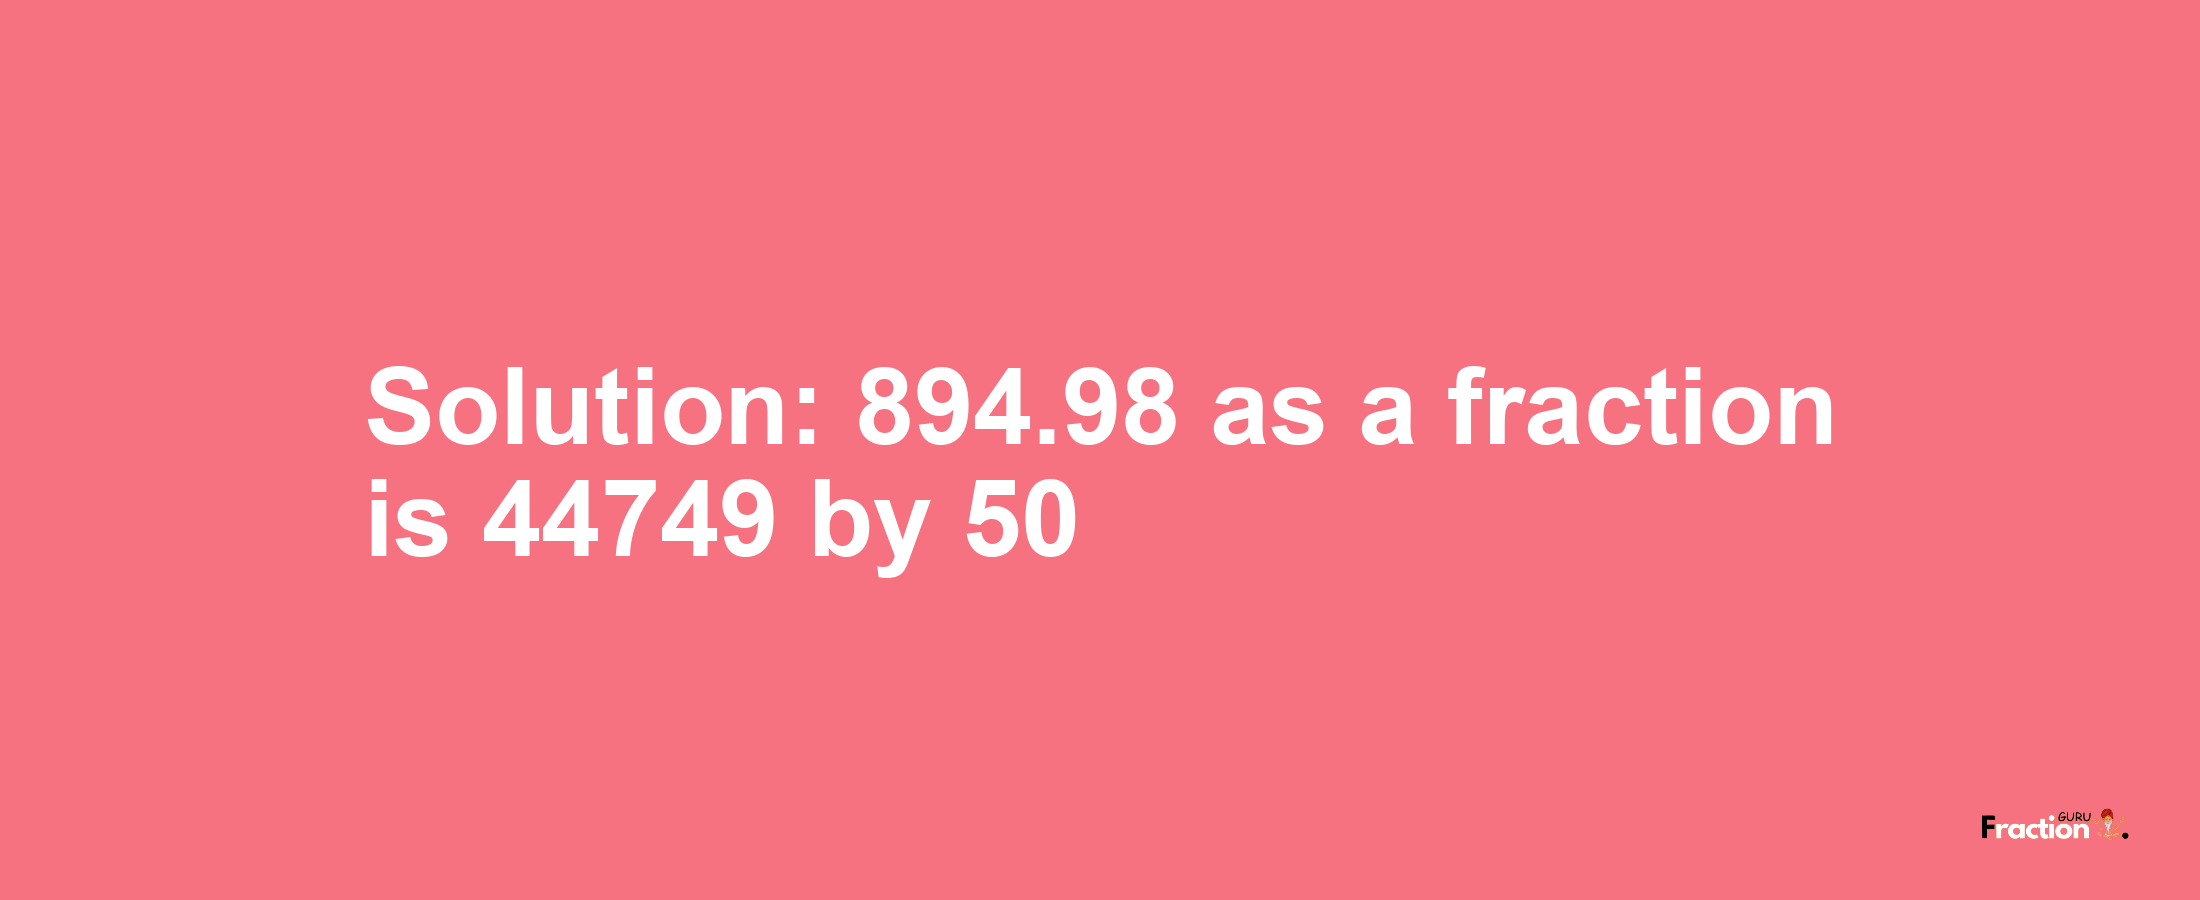 Solution:894.98 as a fraction is 44749/50